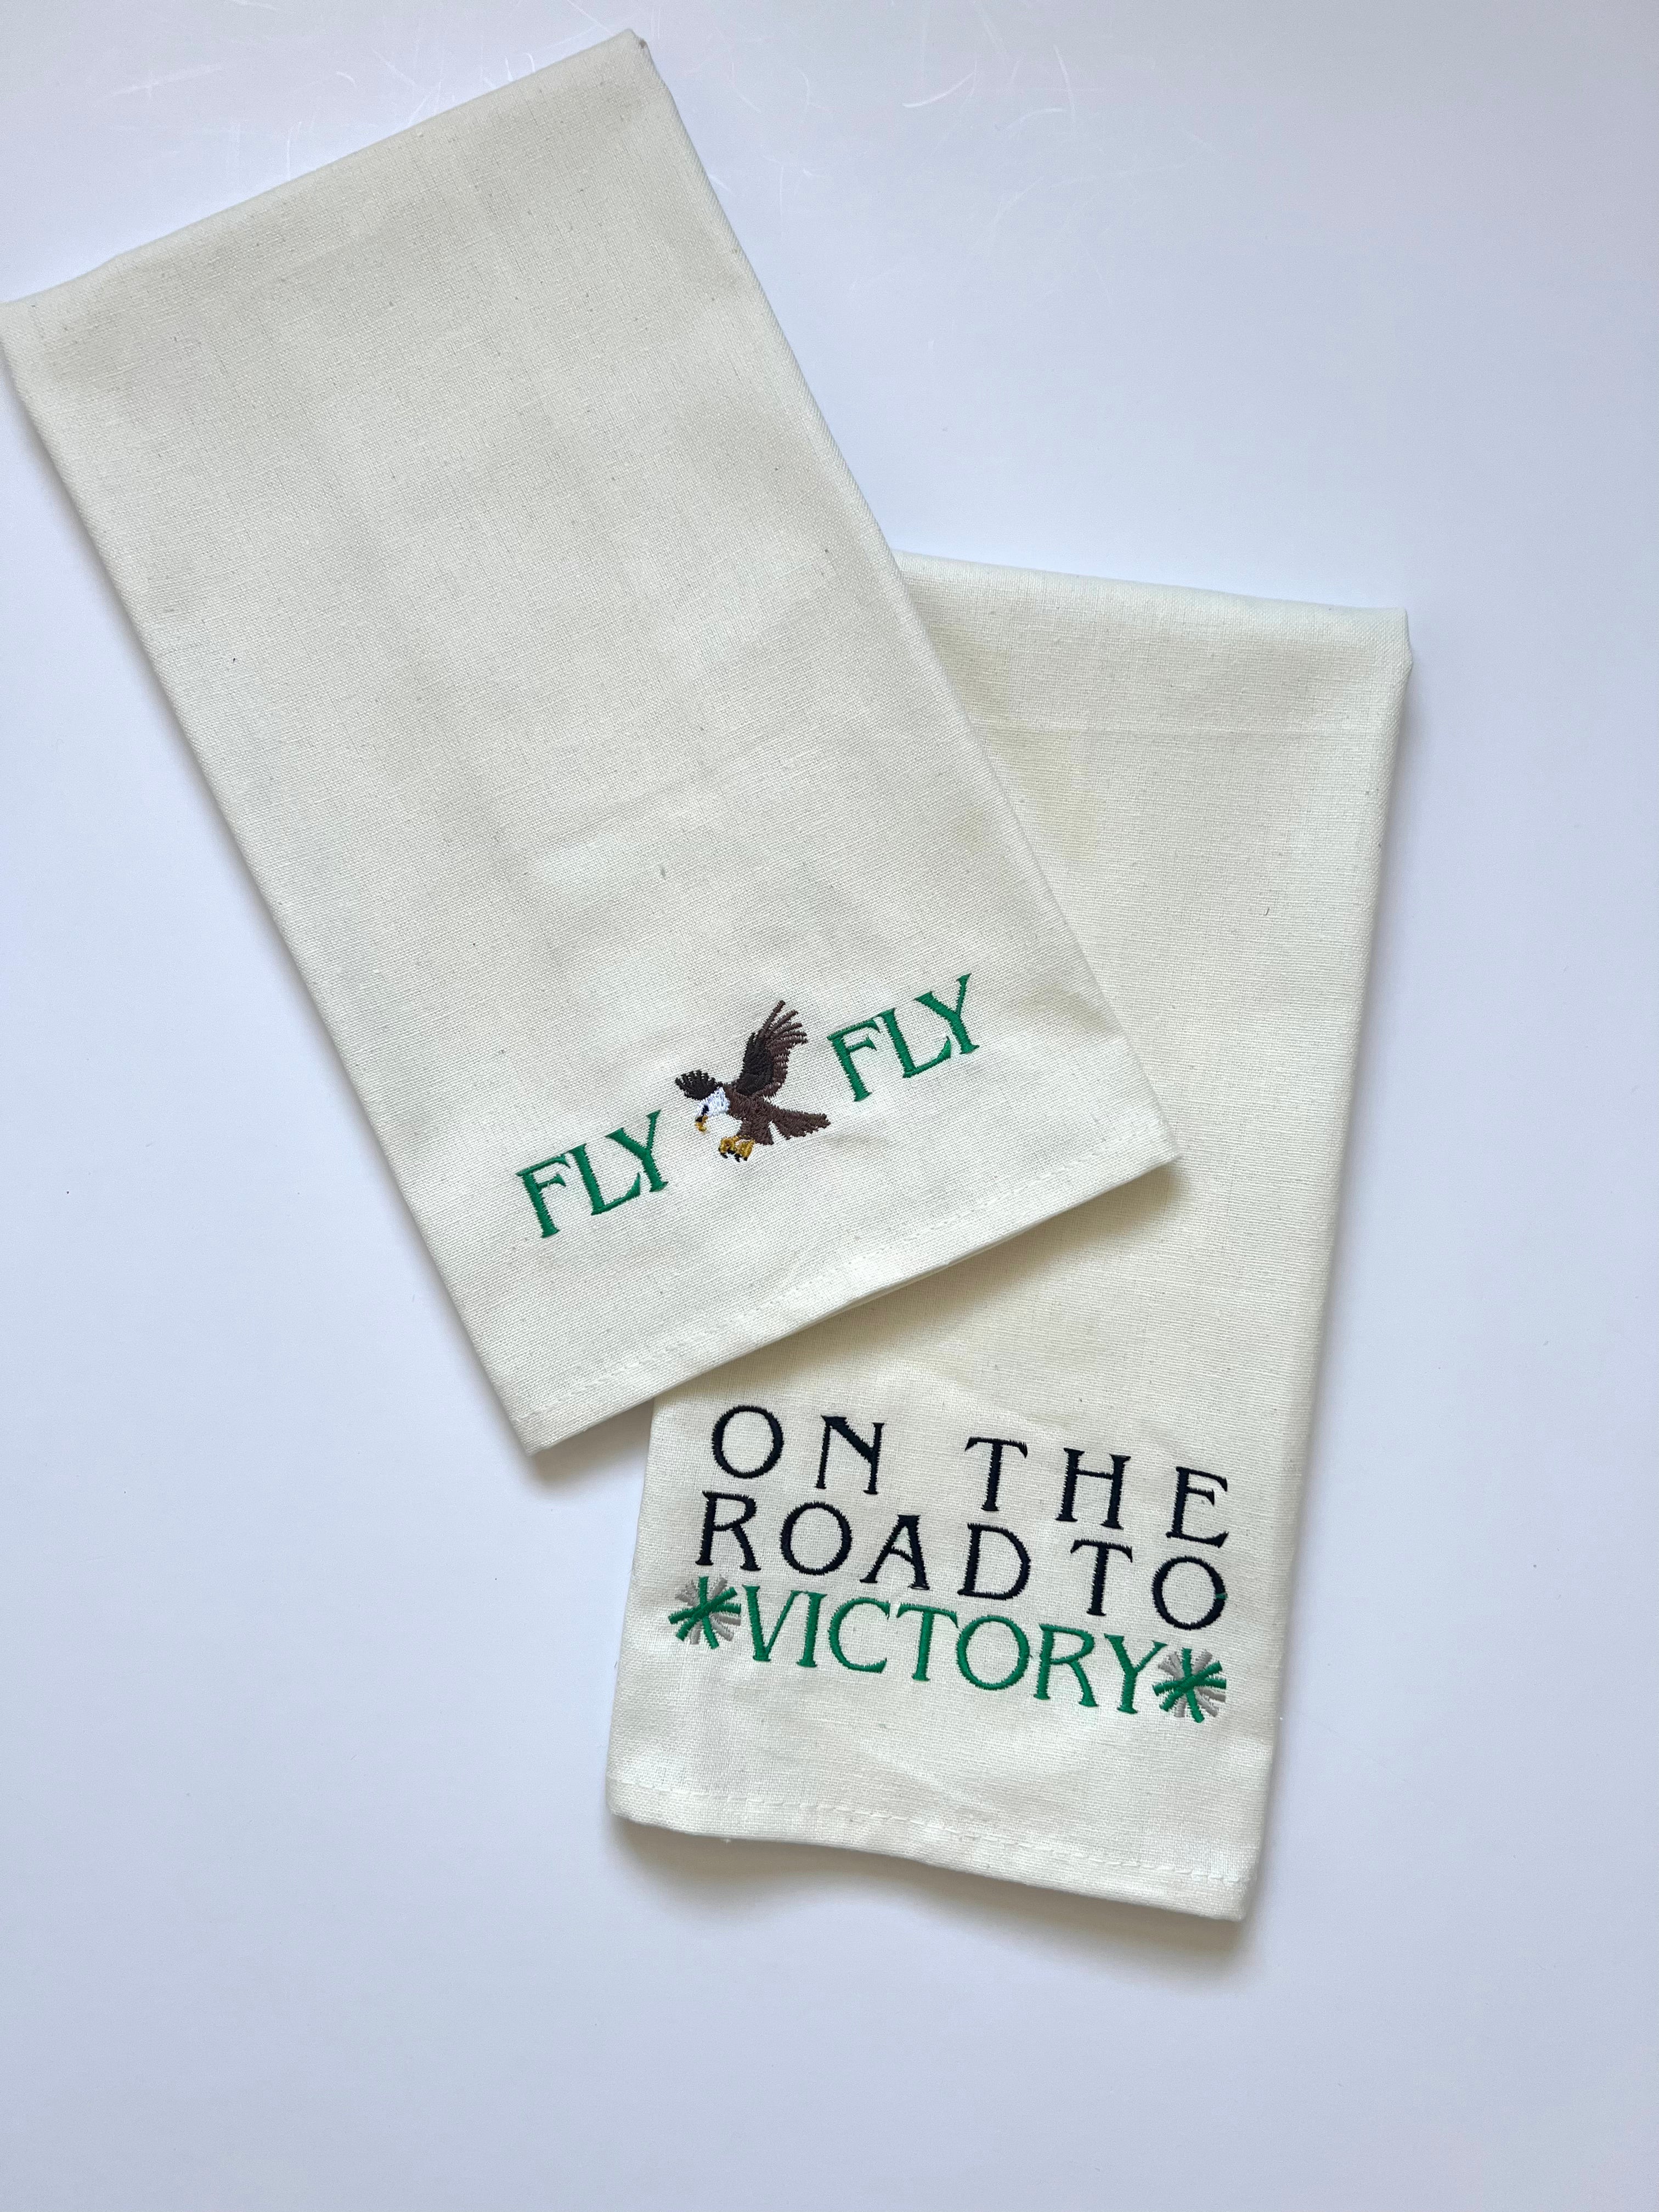 Embroidered Tea Towels (set of 2)